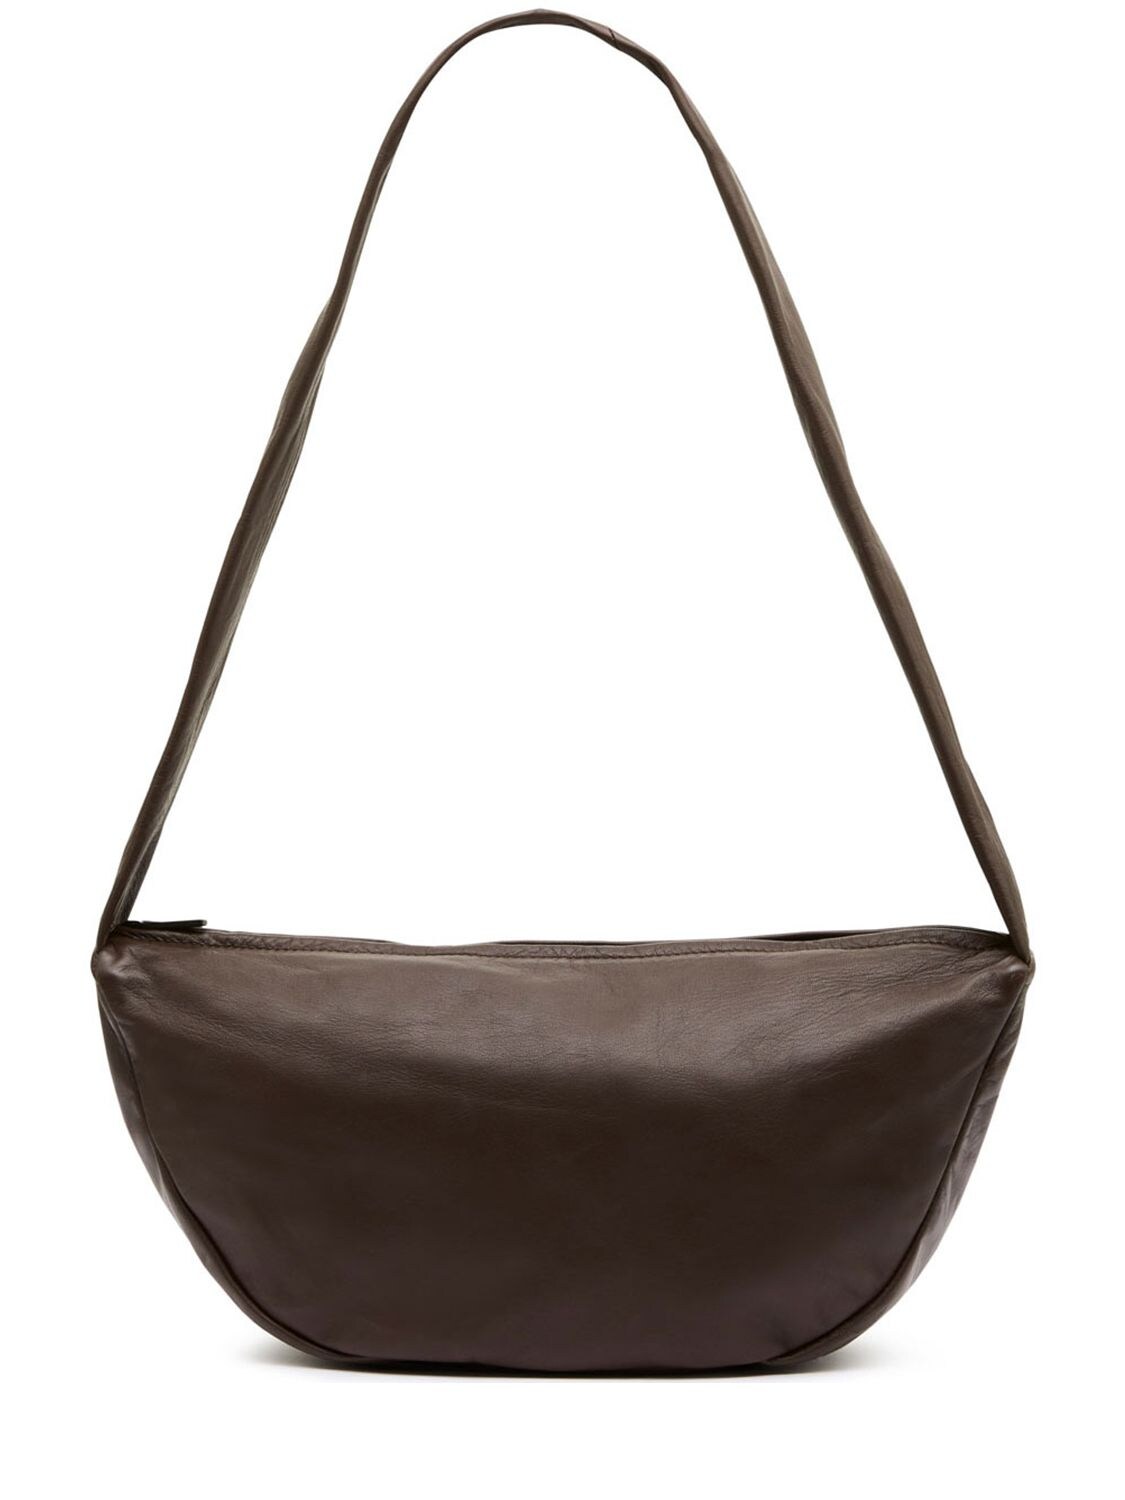 St.agni Large Crescent Soft Leather Bag In Brown